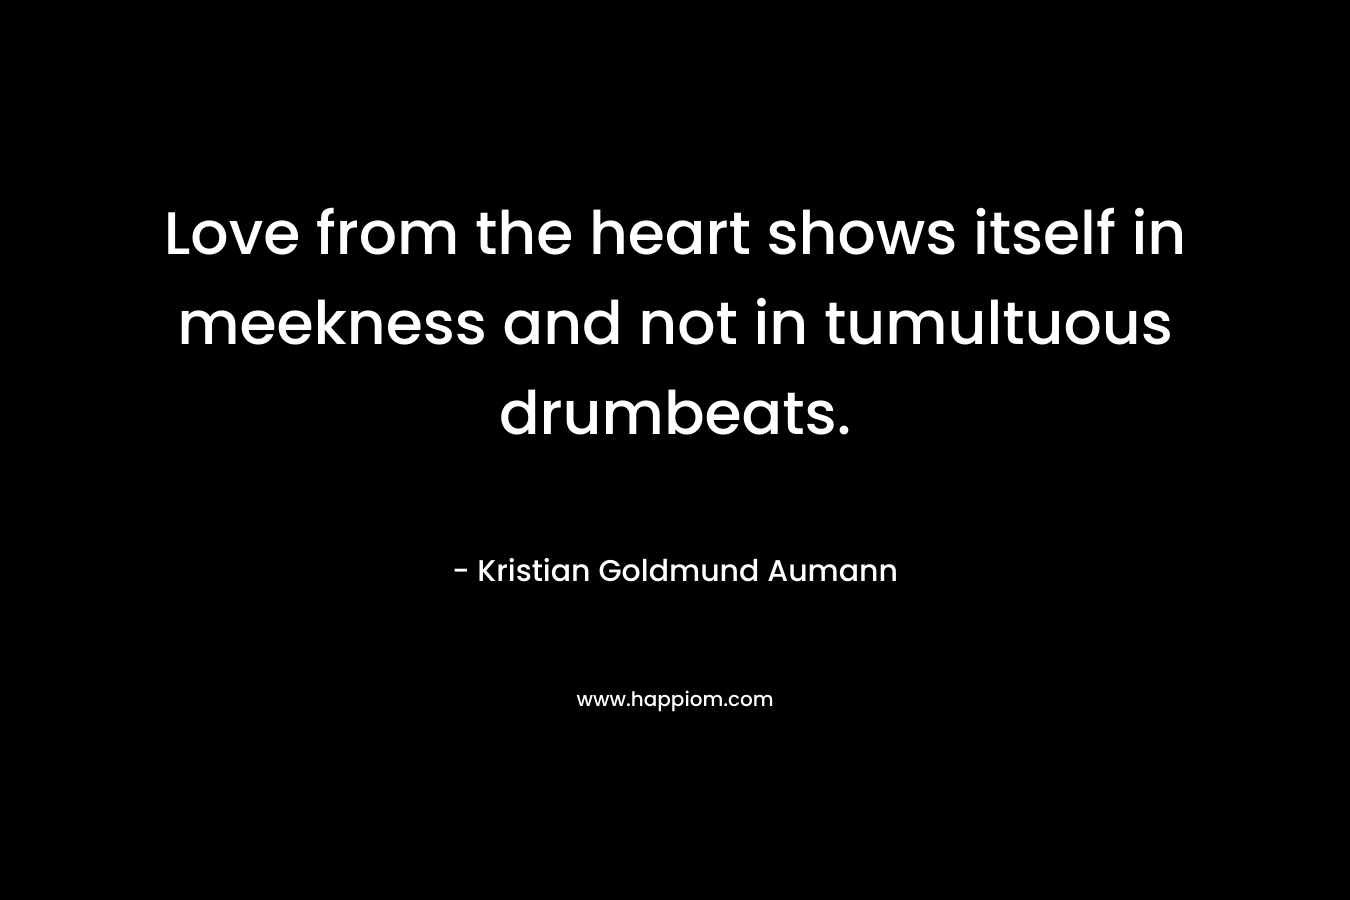 Love from the heart shows itself in meekness and not in tumultuous drumbeats. – Kristian Goldmund Aumann